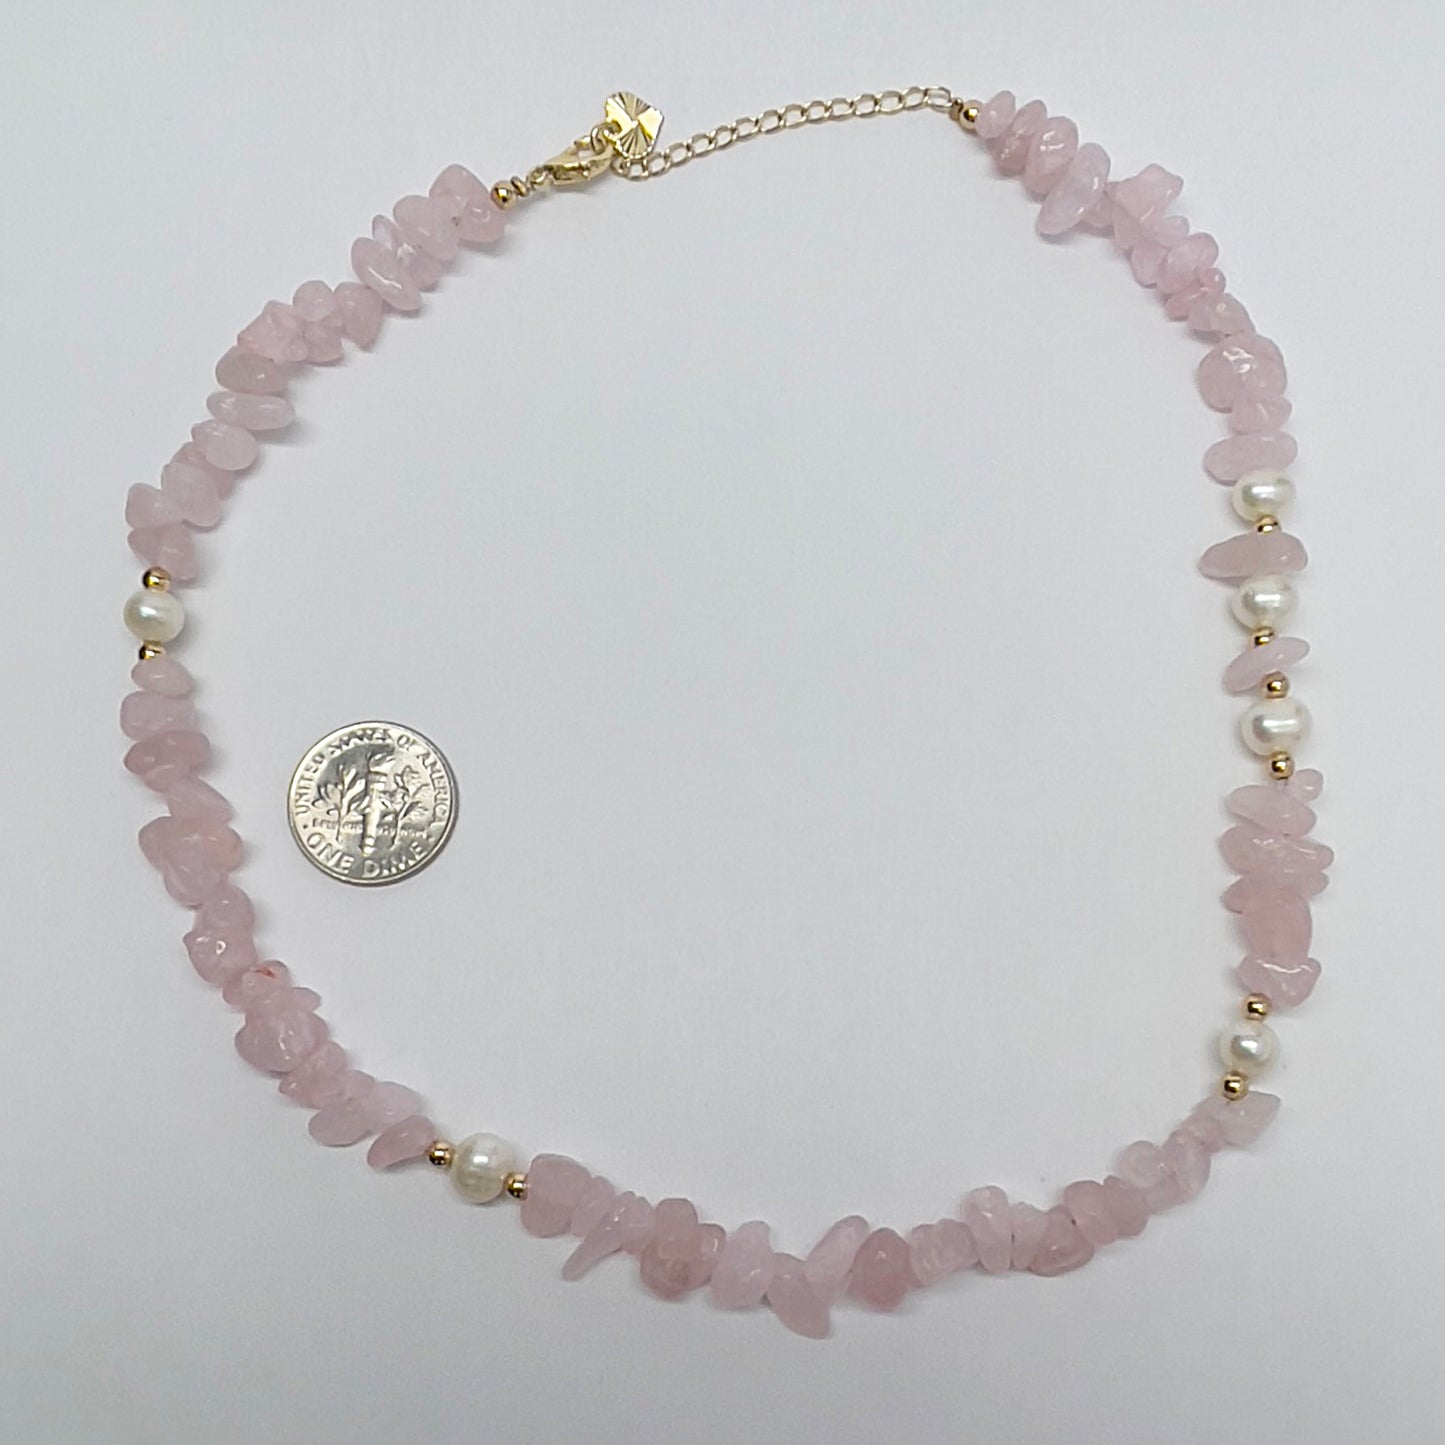 Stonelry Rose Quartz and Pearls Necklace